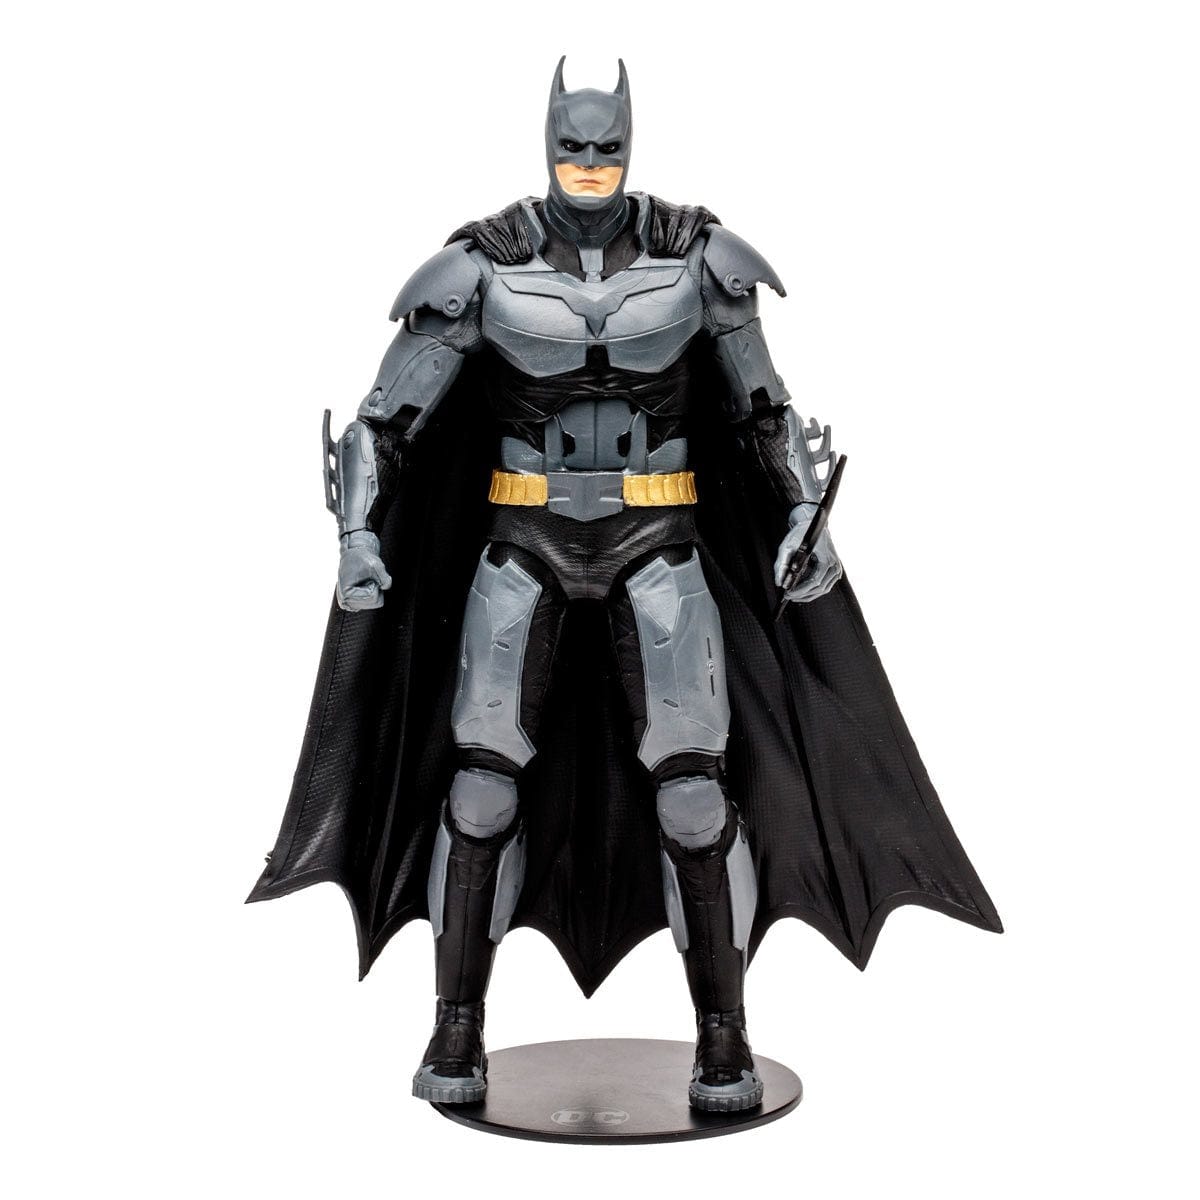 Injustice 2 Batman Page Punchers 7-Inch Scale Action Figure with Injustice Comic Book